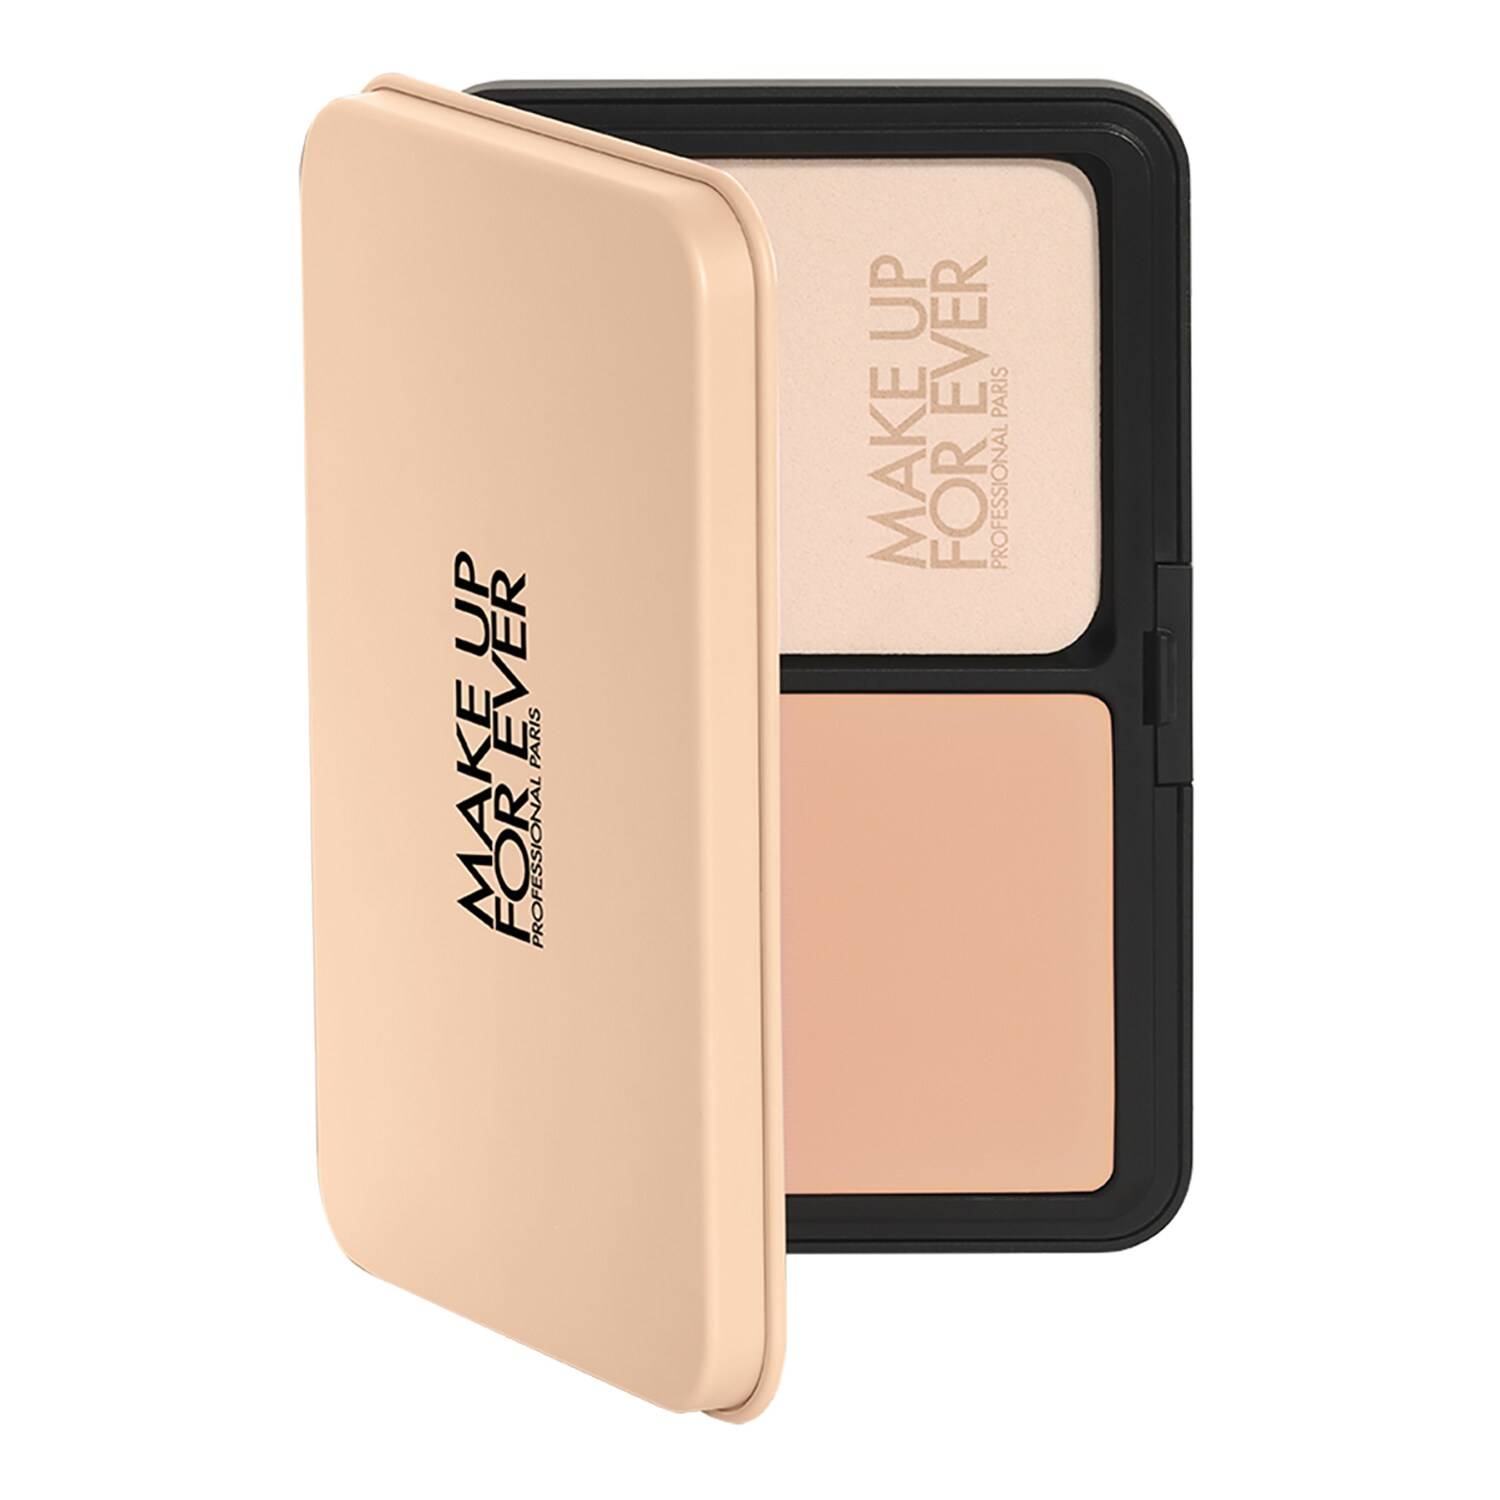 Make Up For Ever Hd Skin Powder Foundation 11G 1R12 - Cool Ivory